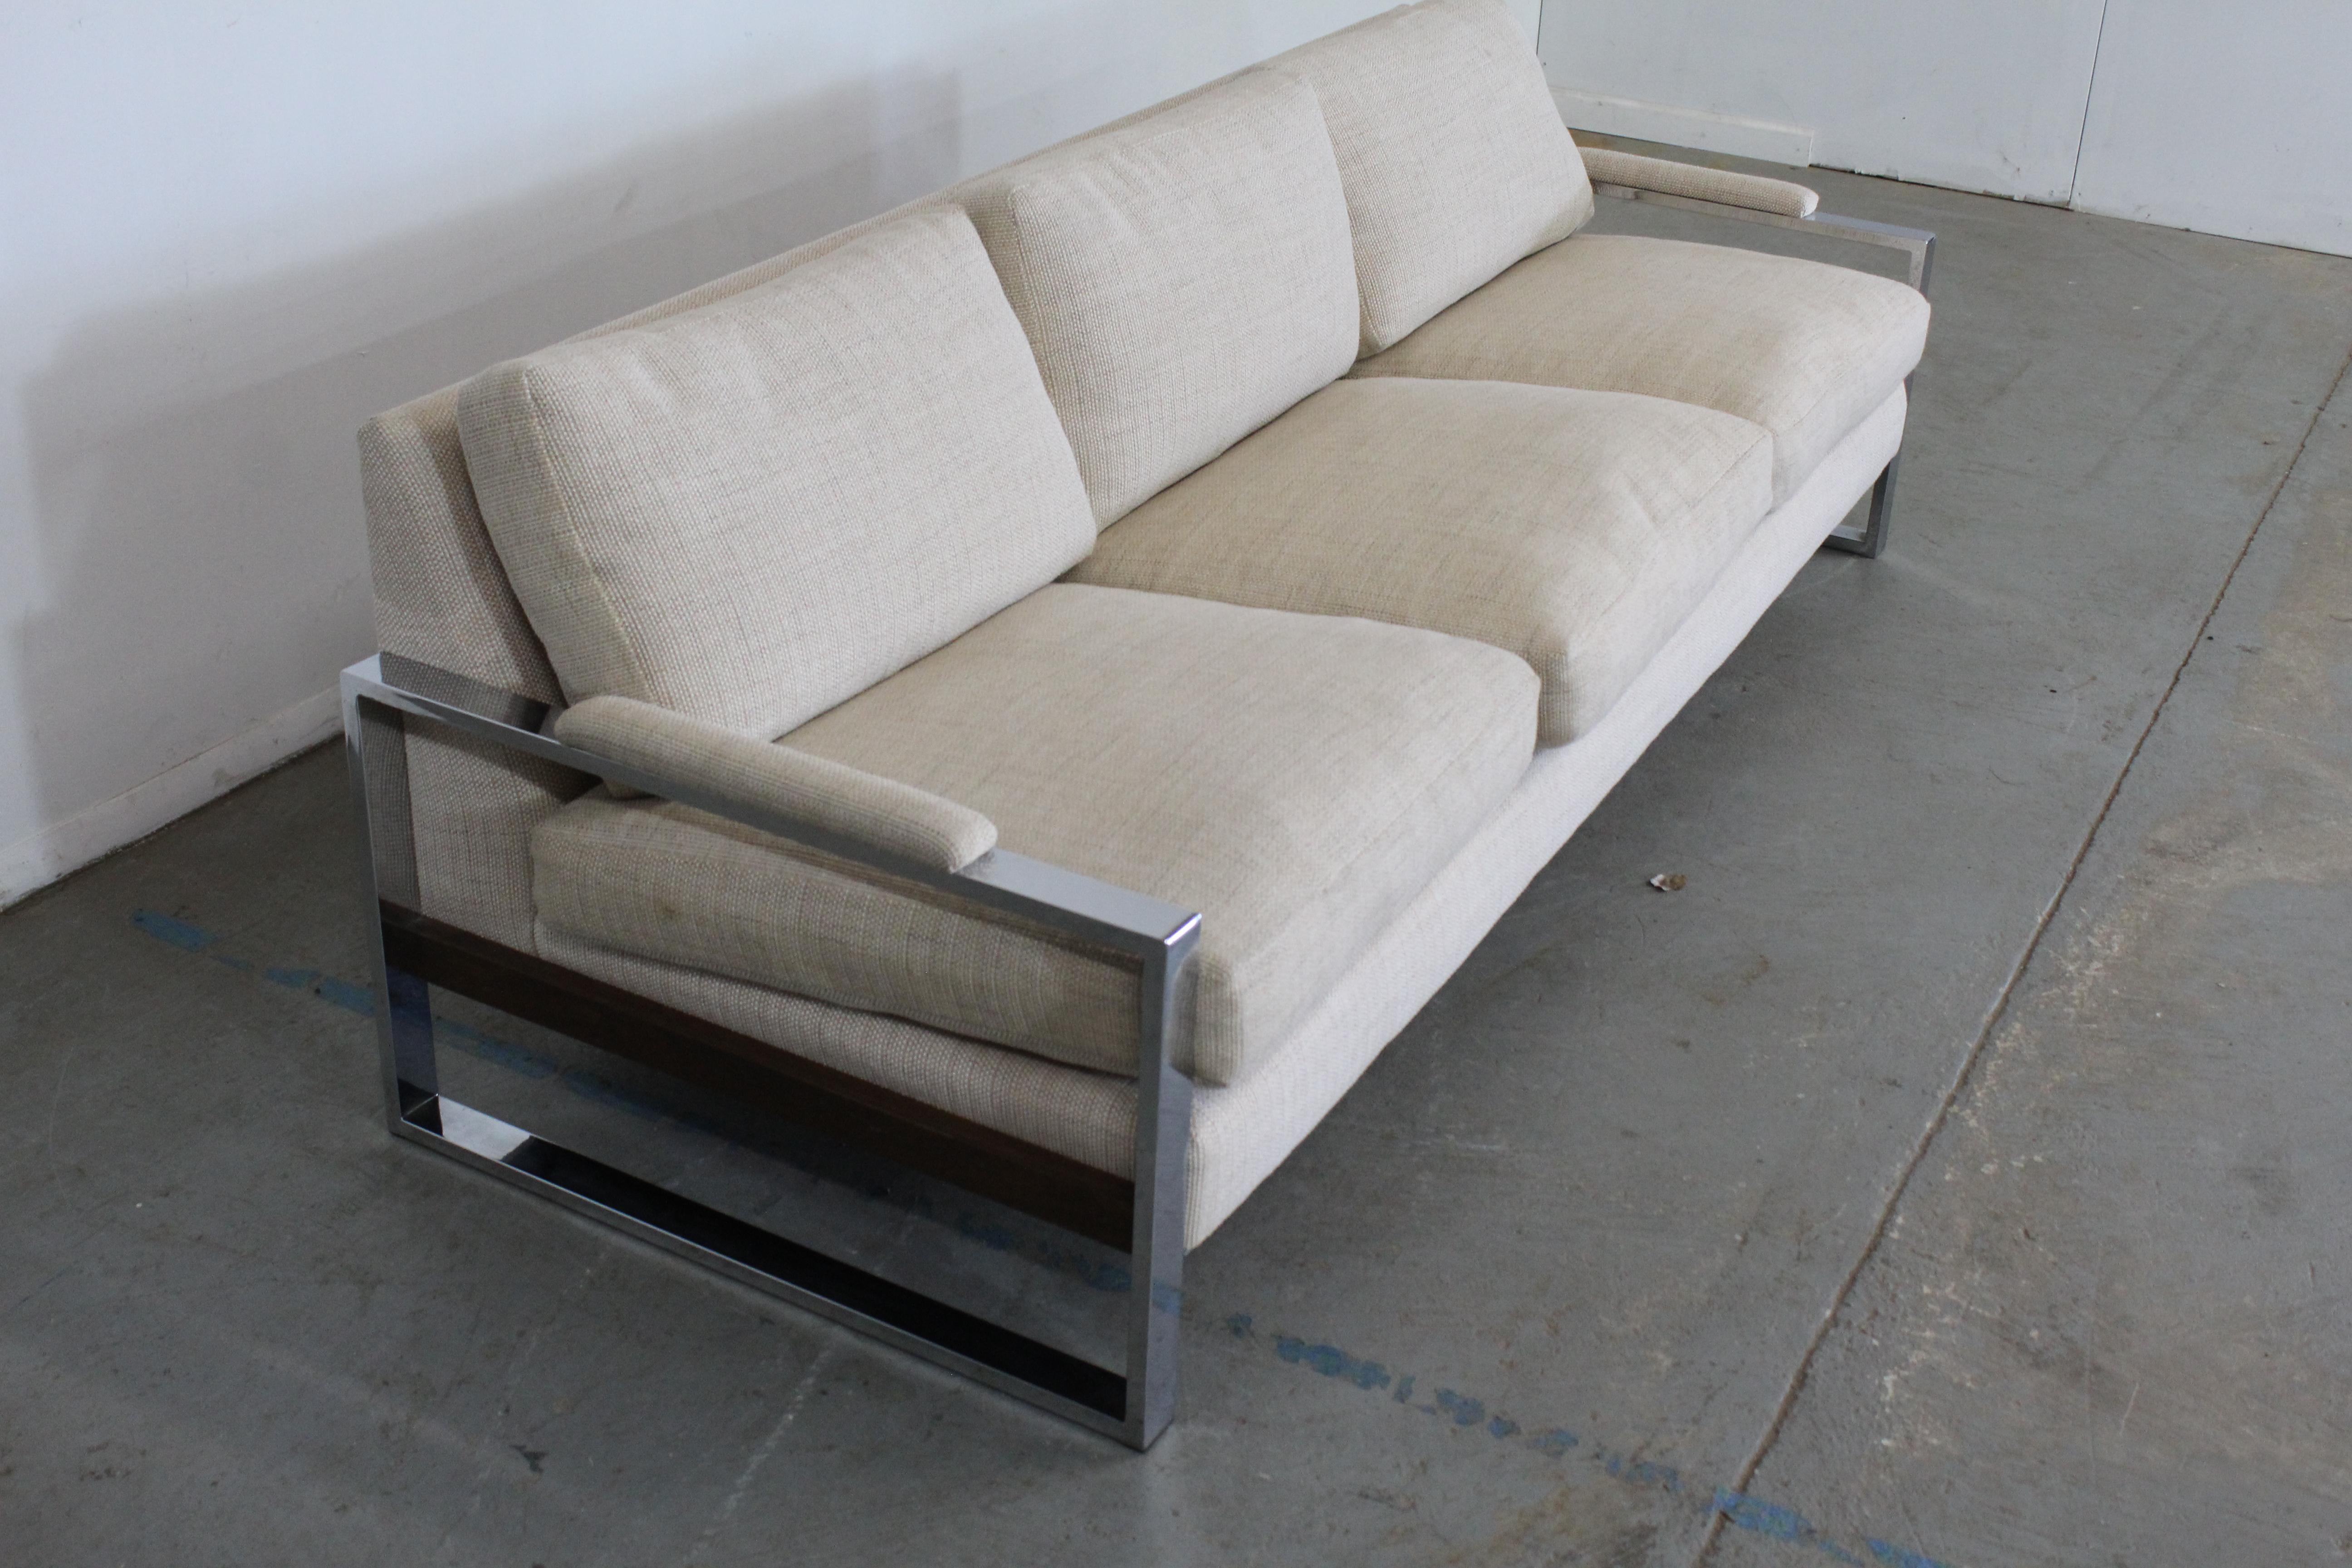 Mid-Century Danish Modern Adrian Pearsall chrome craft associates sofa.

Offered is a gorgeous vintage mid-century modern sofa, By Craft Associates- Adrian Pearsall. Features 3 removable seat and back cushions, and sits on Chrome and a Walnut